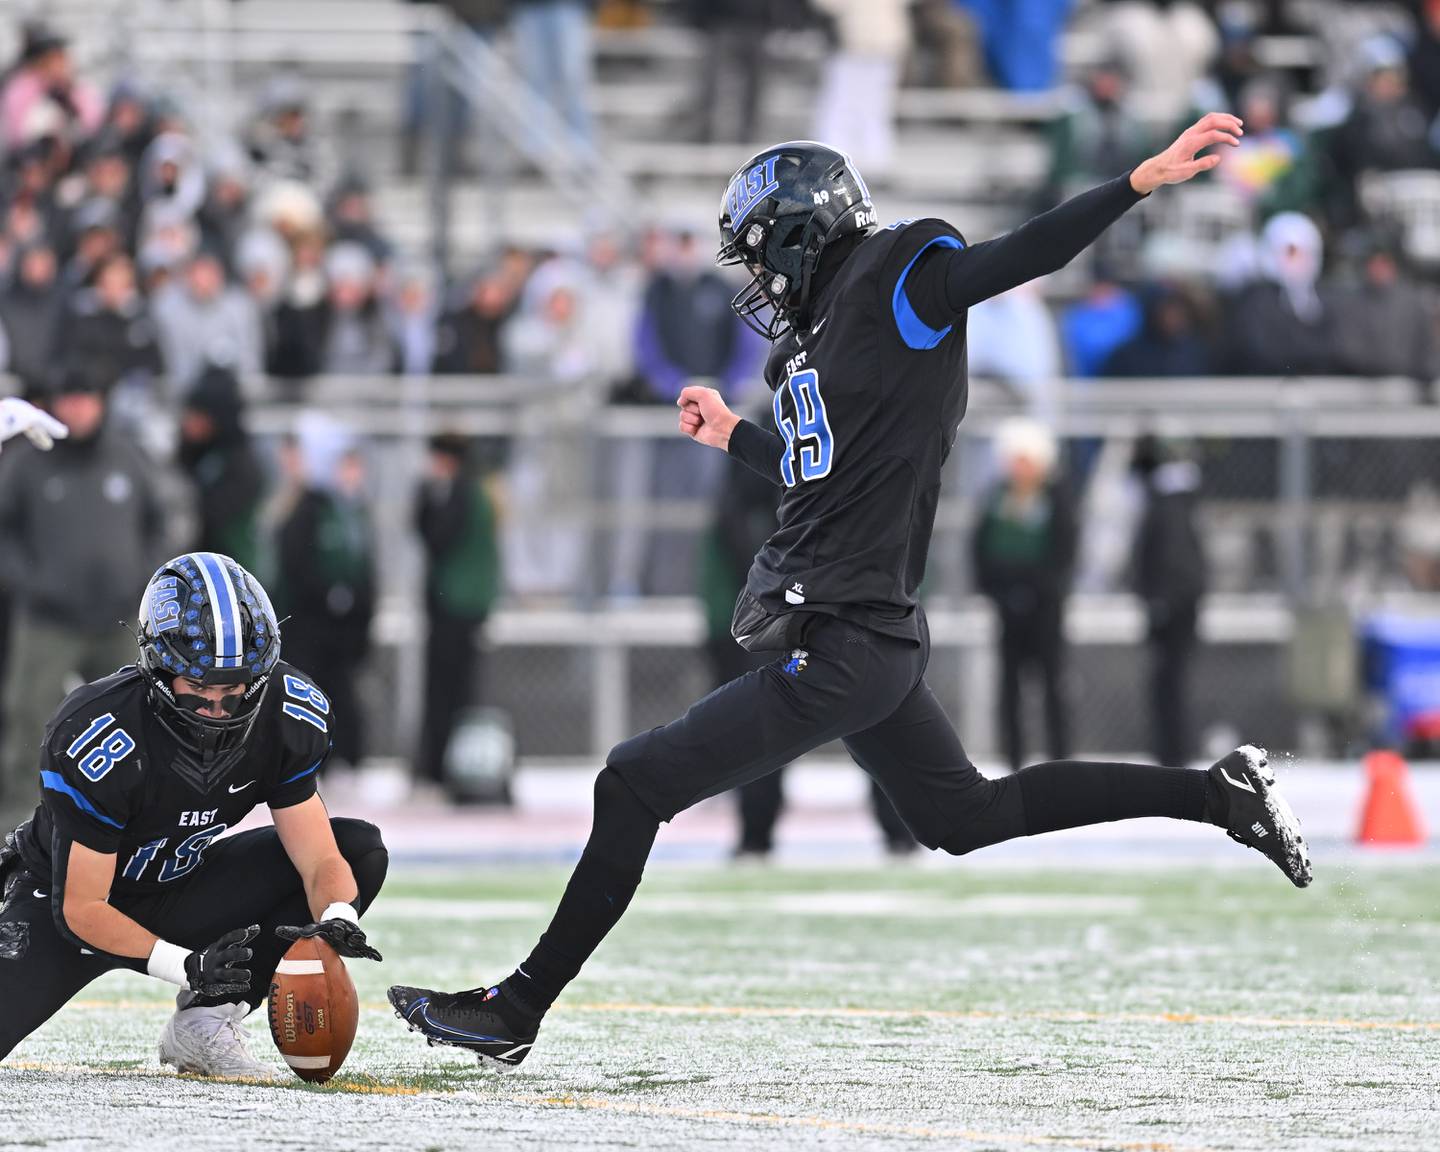 Lincoln-Way East's Carter Nair (49) tries the point after attempt during the IHSA Class 8A semifinals on Saturday, November 19, 2022, at Frankfort.